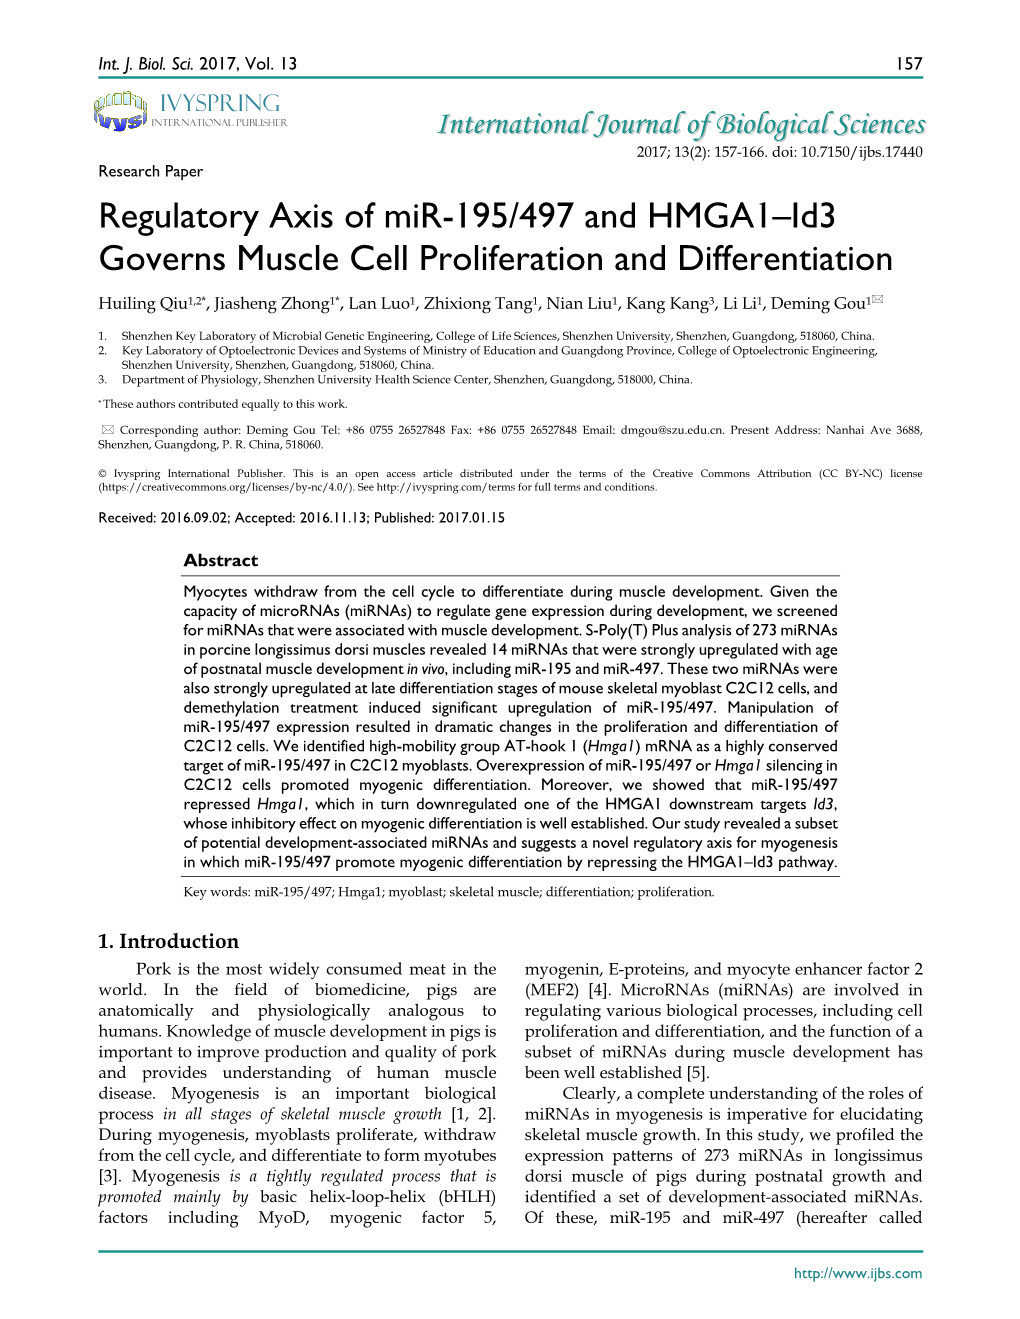 Regulatory Axis of Mir-195/497 and HMGA1–Id3 Governs Muscle Cell